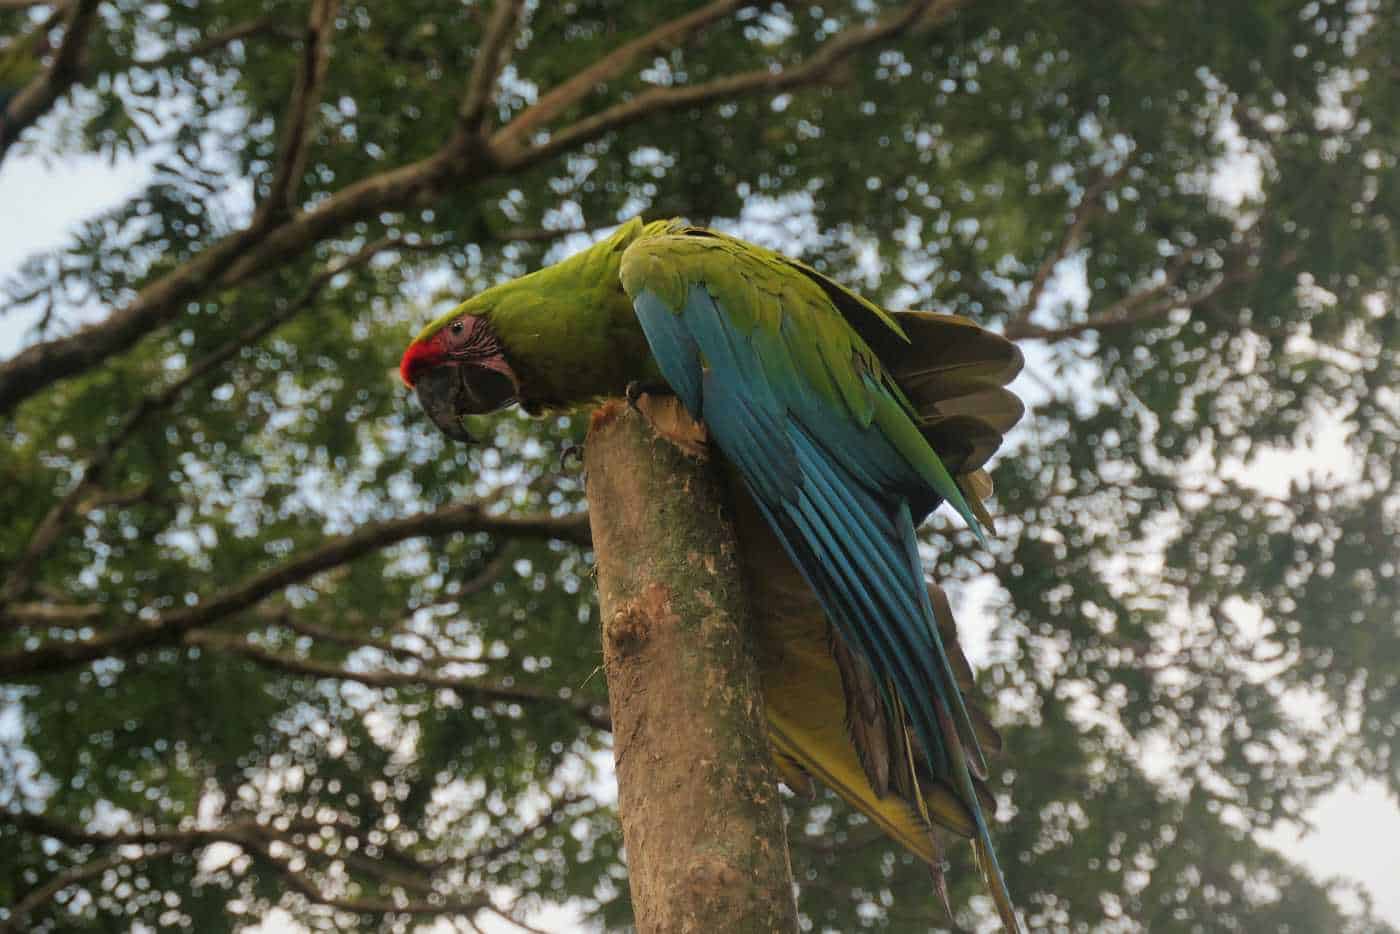 One of the released Macaws having a little stretch before flying off!